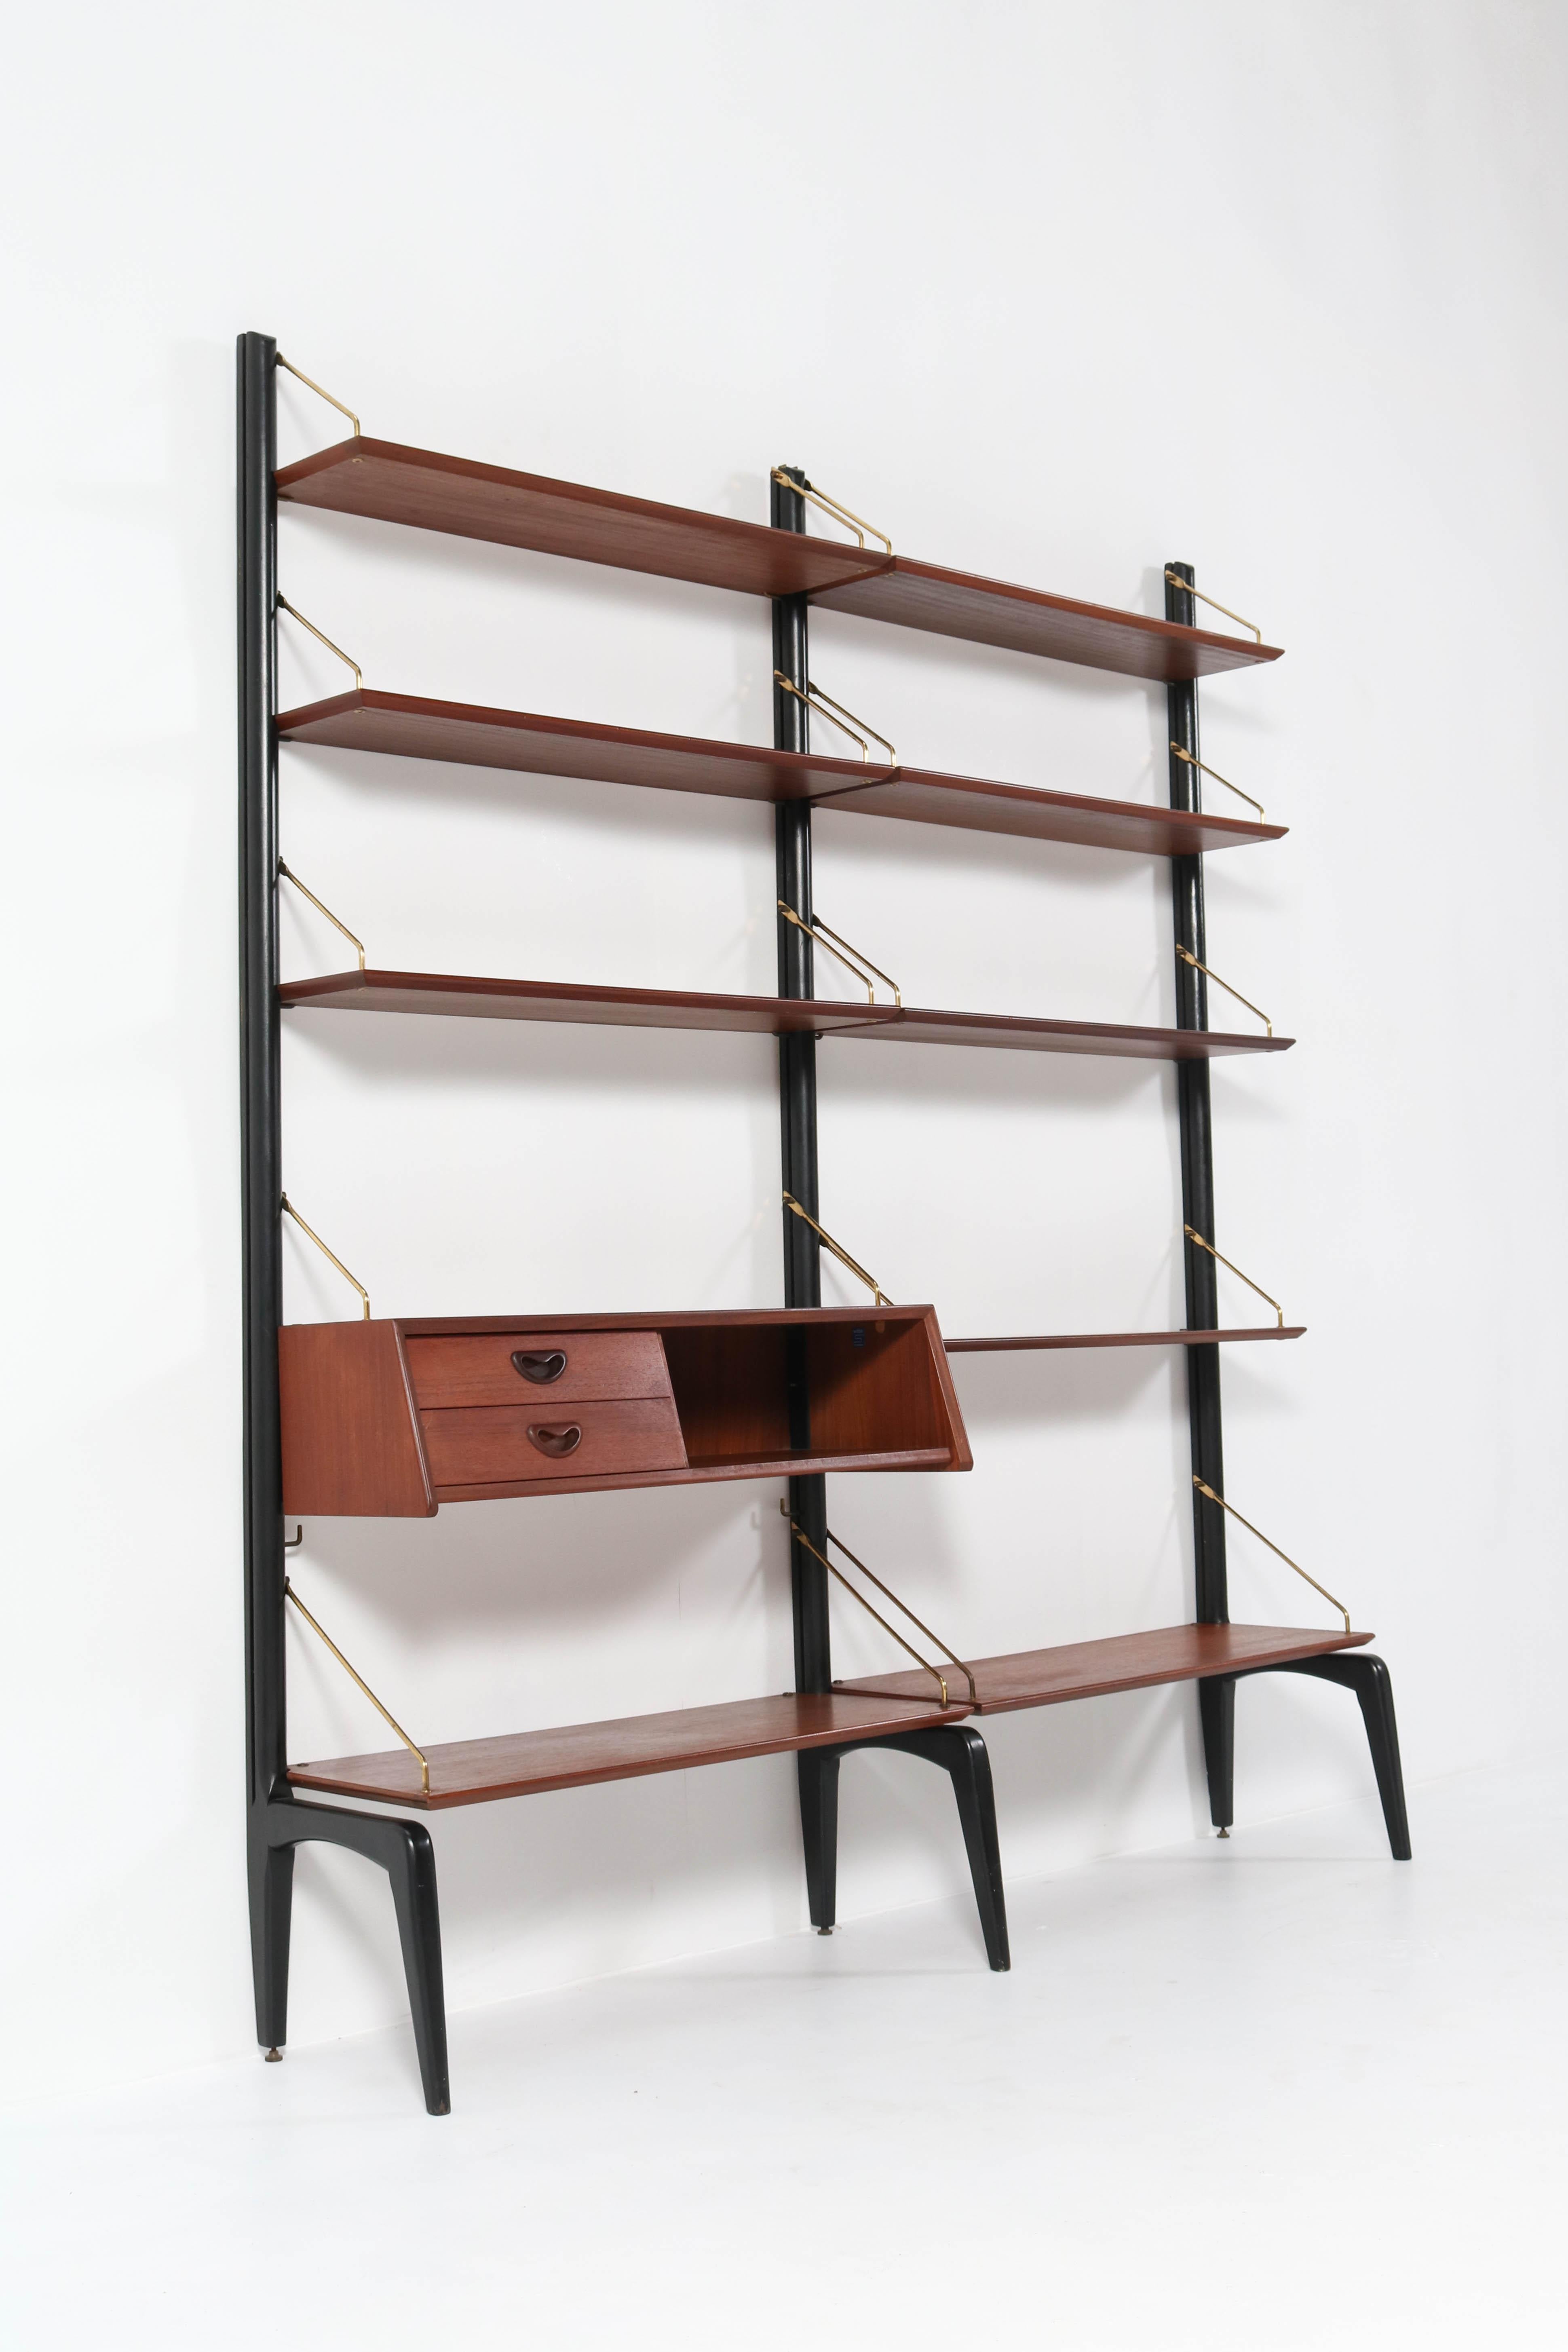 Magnificent and elegant Mid-Century Modern freestanding modular wall unit.
Design by Louis van Teeffelen for Webe.
Striking Dutch design from the 1950s.
This wall unit consists of:
3 original black lacquered wooden uprights. H: 200 cm or 78.74